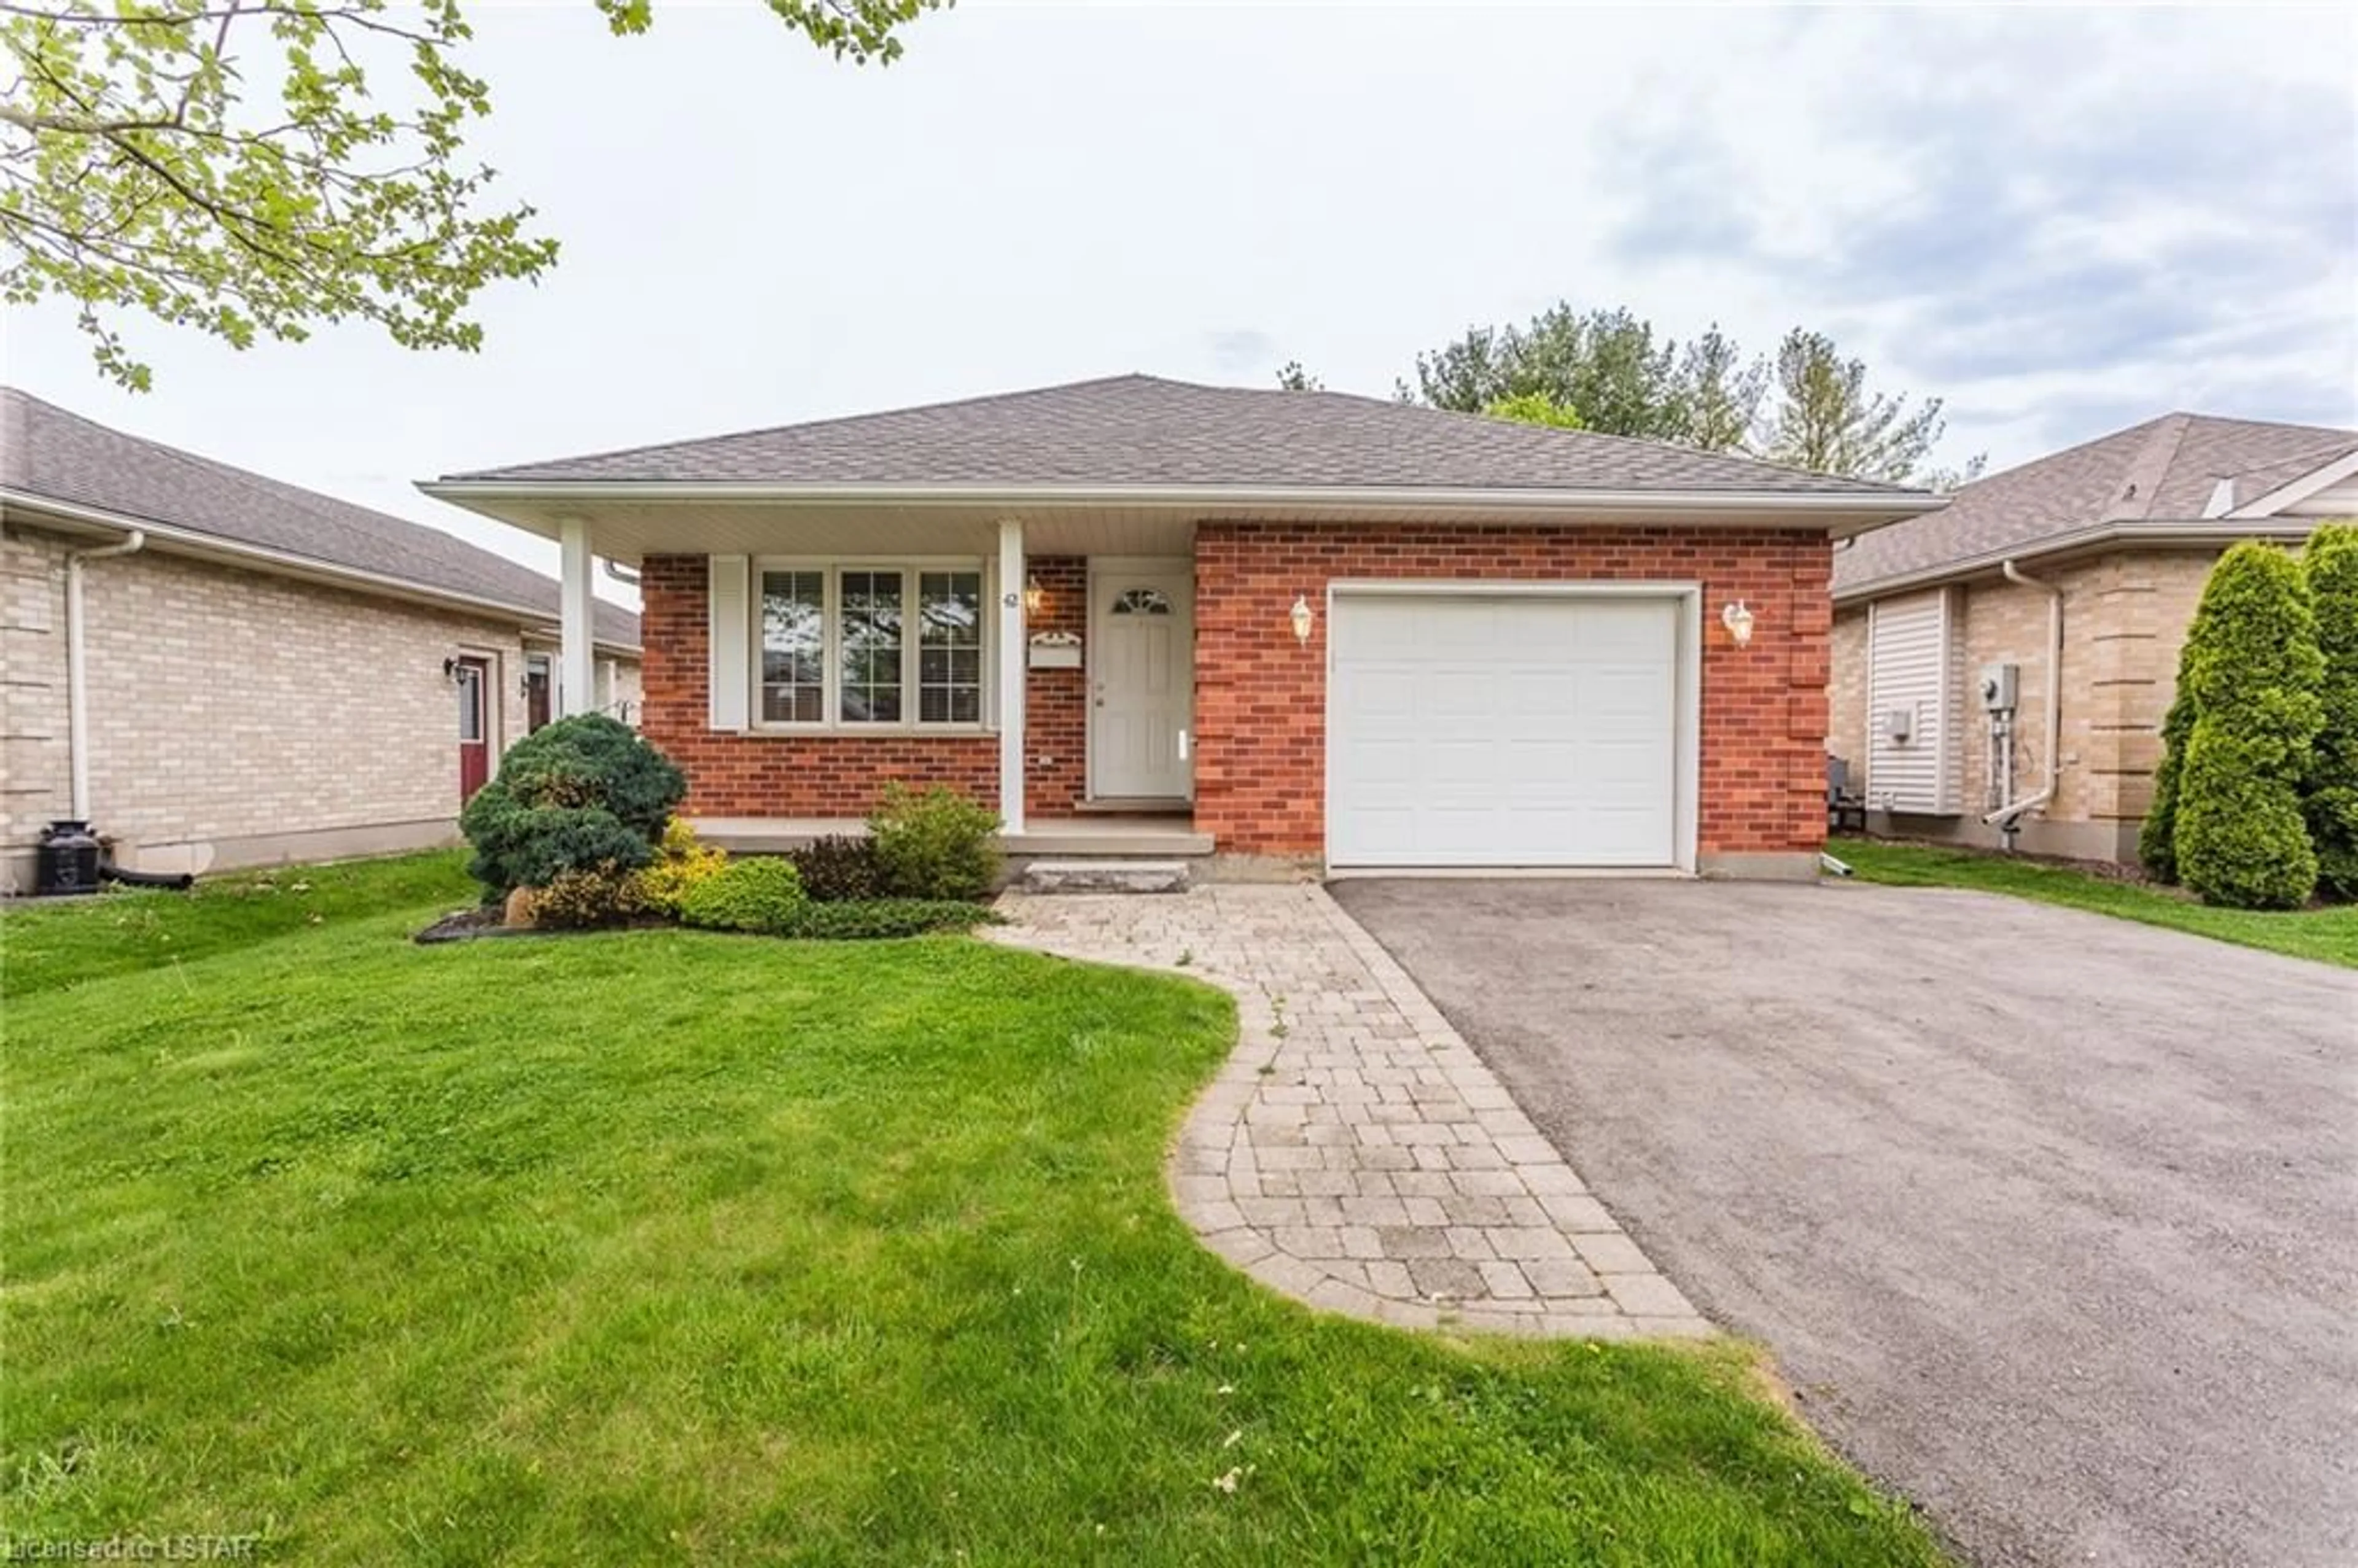 Home with brick exterior material for 42 Ponsford Pl, St. Thomas Ontario N5P 4J2